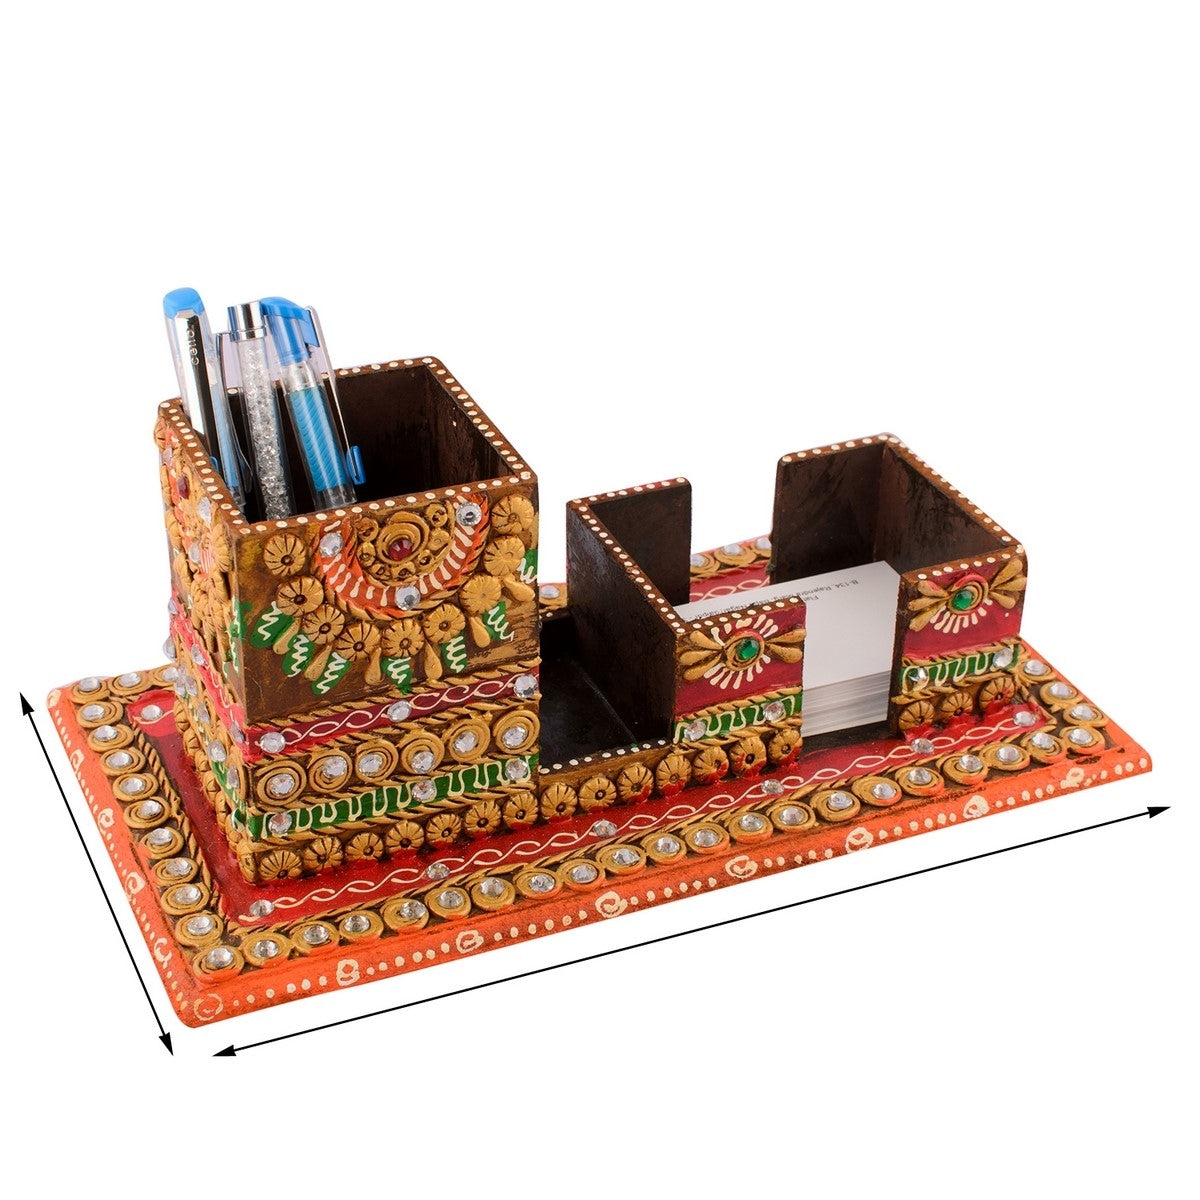 Multiutility Papier-Mache Wooden Penstand and Visiting Card Holder 1